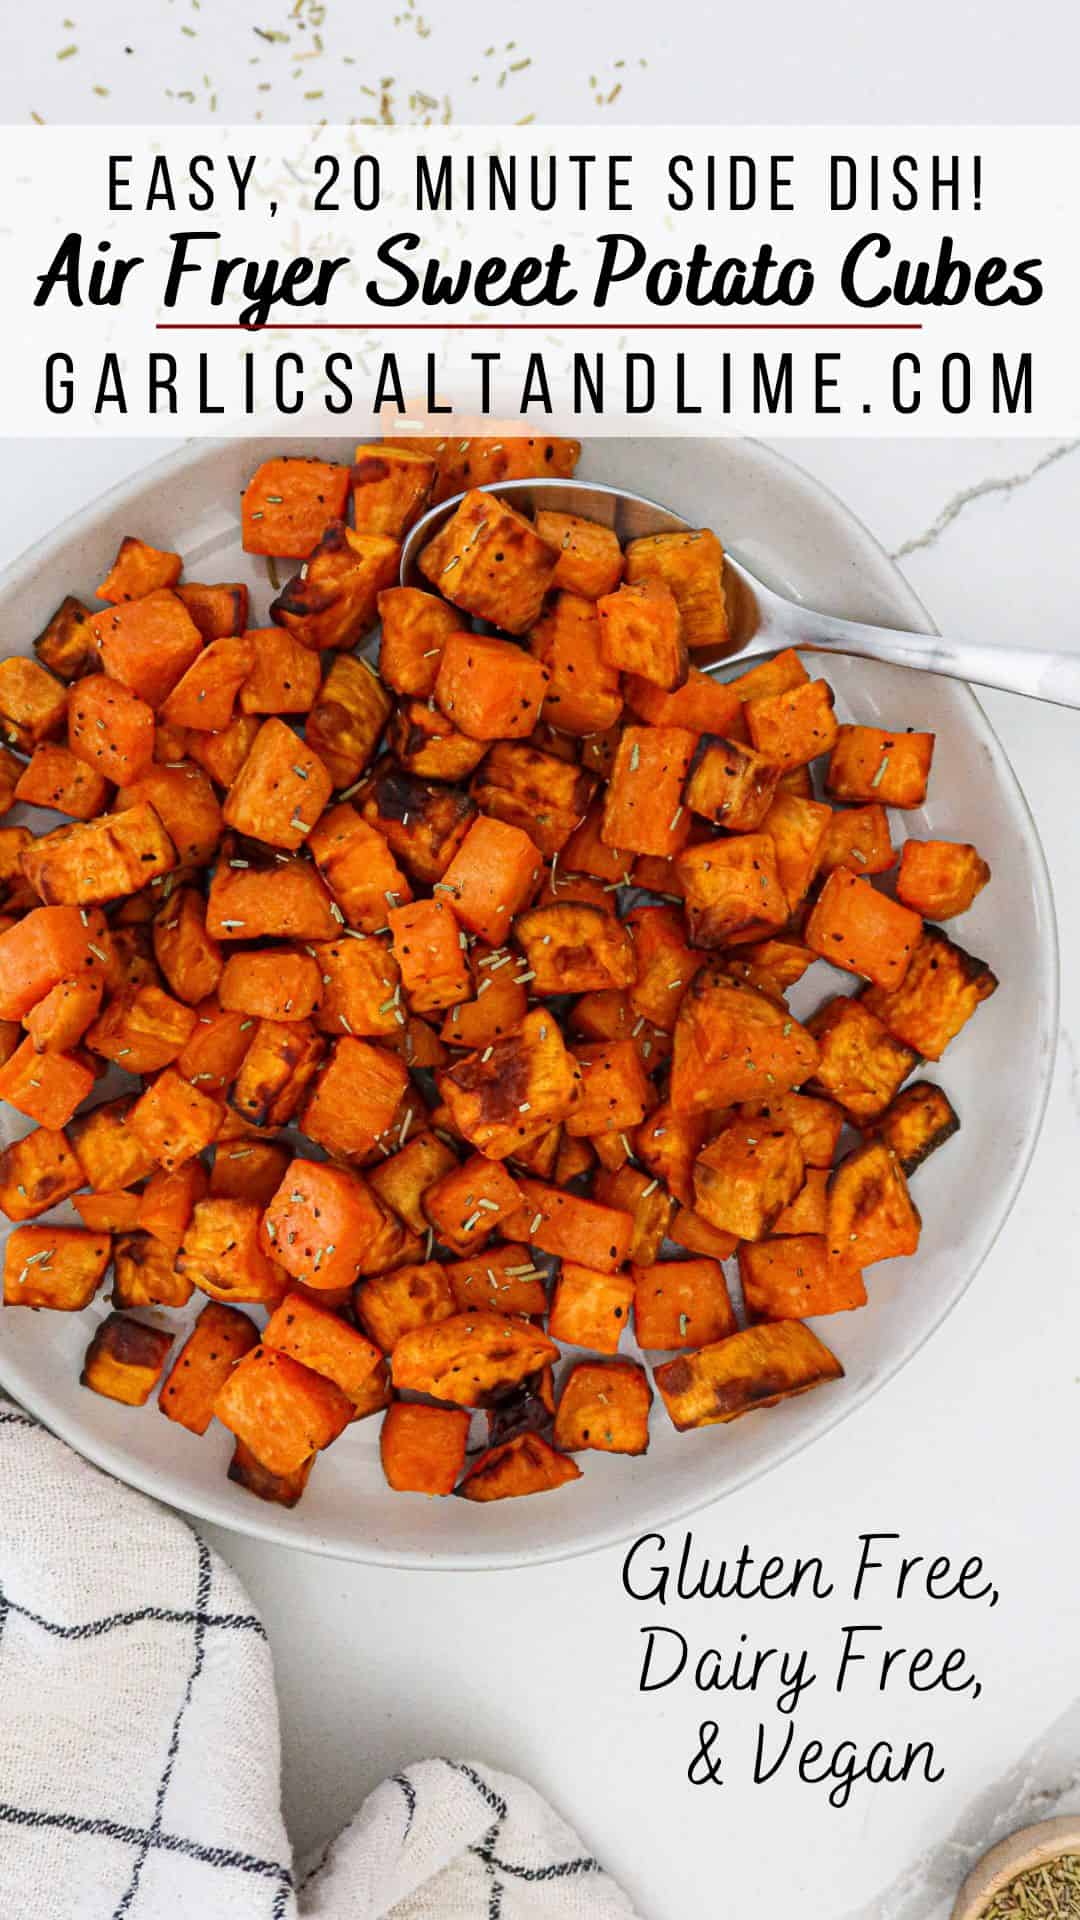 Air fryer sweet potato cubes in a serving bowl with text overlay for Pinterest.